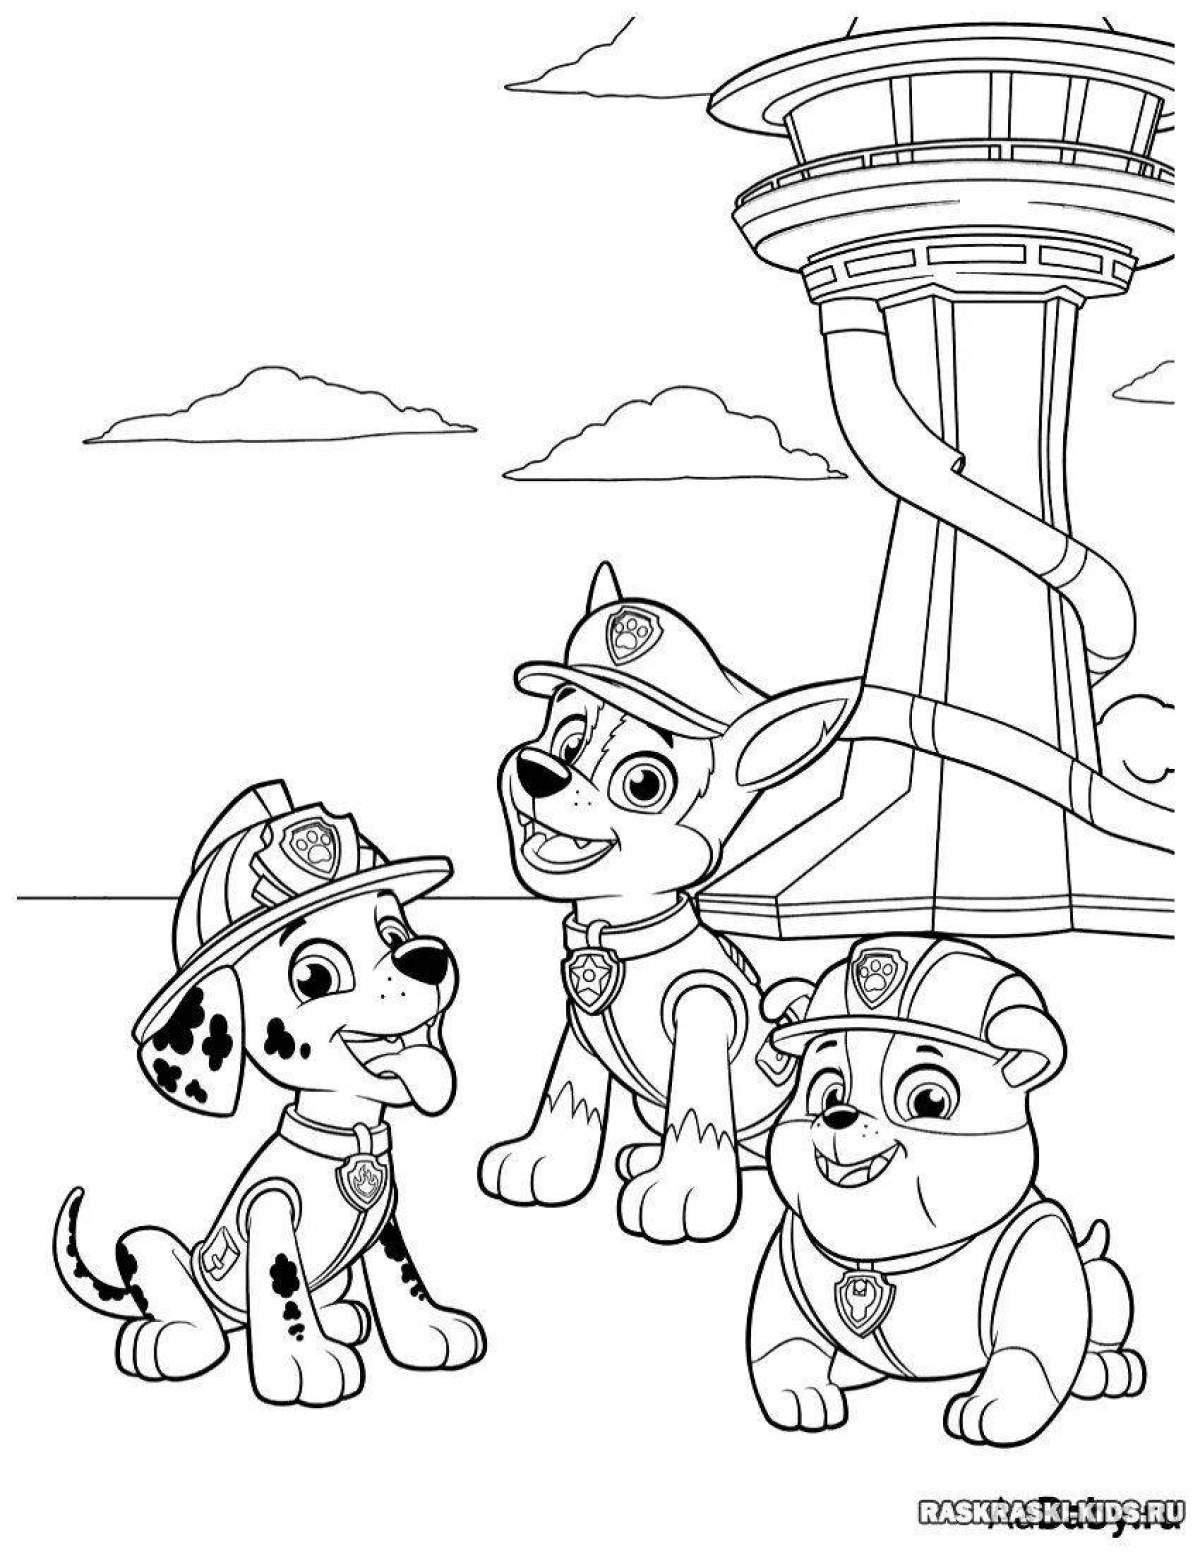 Great paw patrol coloring video